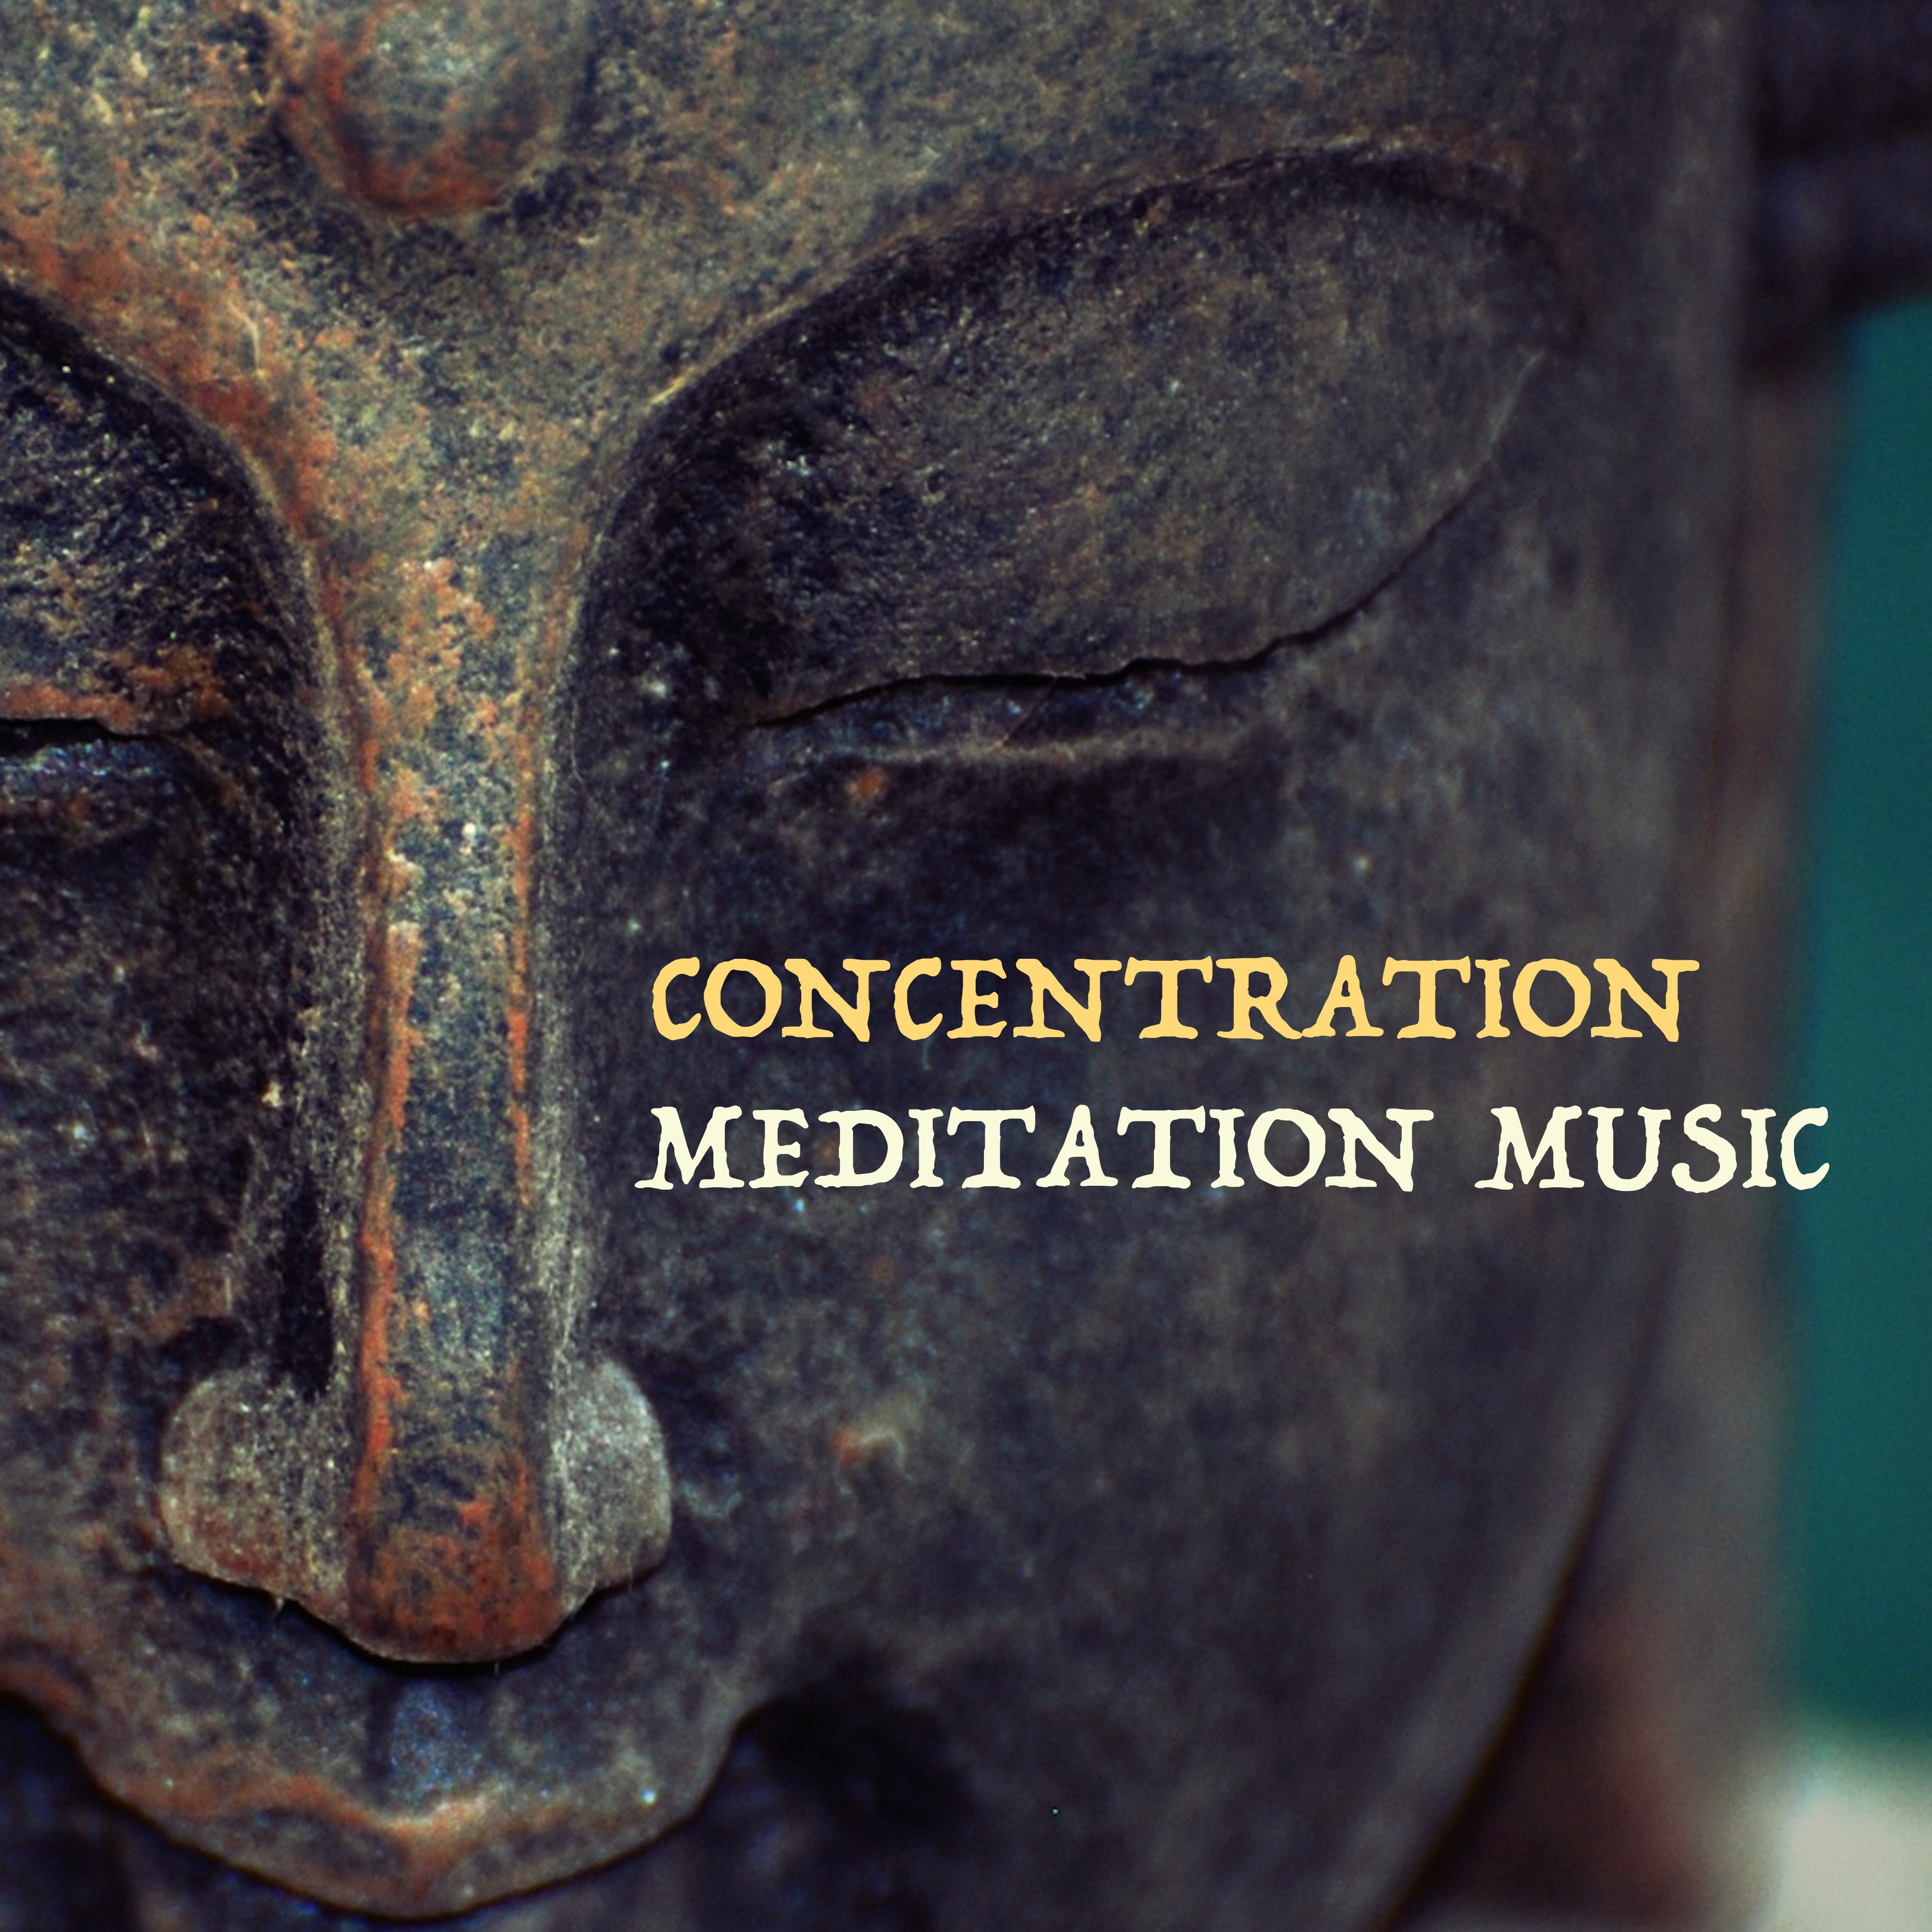 Concentration Meditation Music: Best Songs to Stay Focused and Concentrated at Work, Soothing Music for Relaxation and Free Your Mind